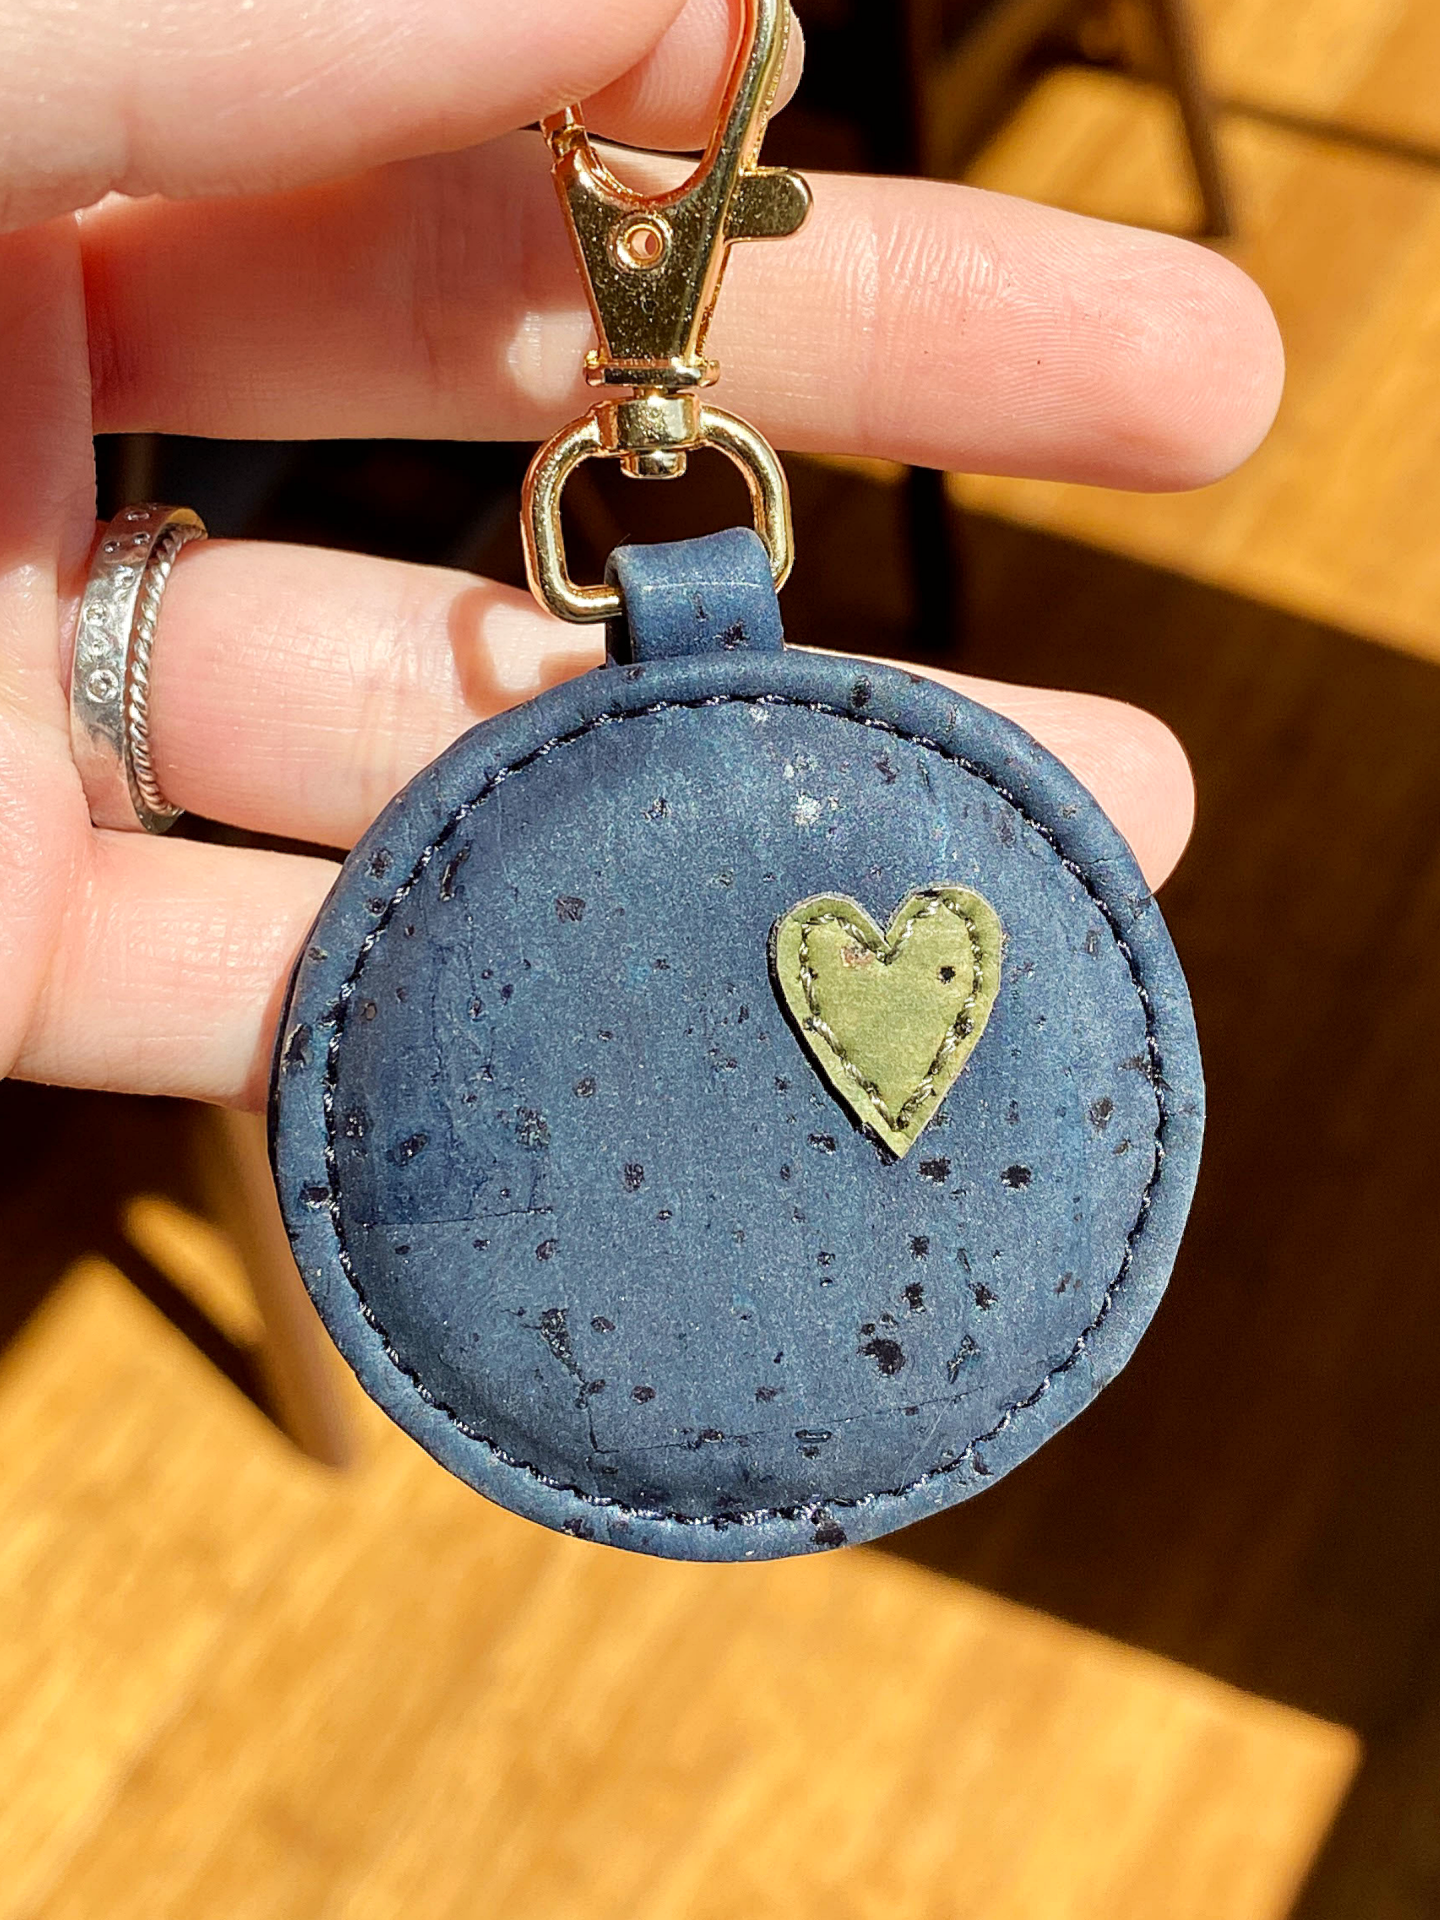 Embrace sustainable style with our handmade Earth-shaped cork keychain. This eco-friendly accessory reminds you to care for the planet while keeping keys secure. Hypoallergenic, waterproof, and lightweight, it's the perfect gift for Earth Mamas and eco-conscious souls.